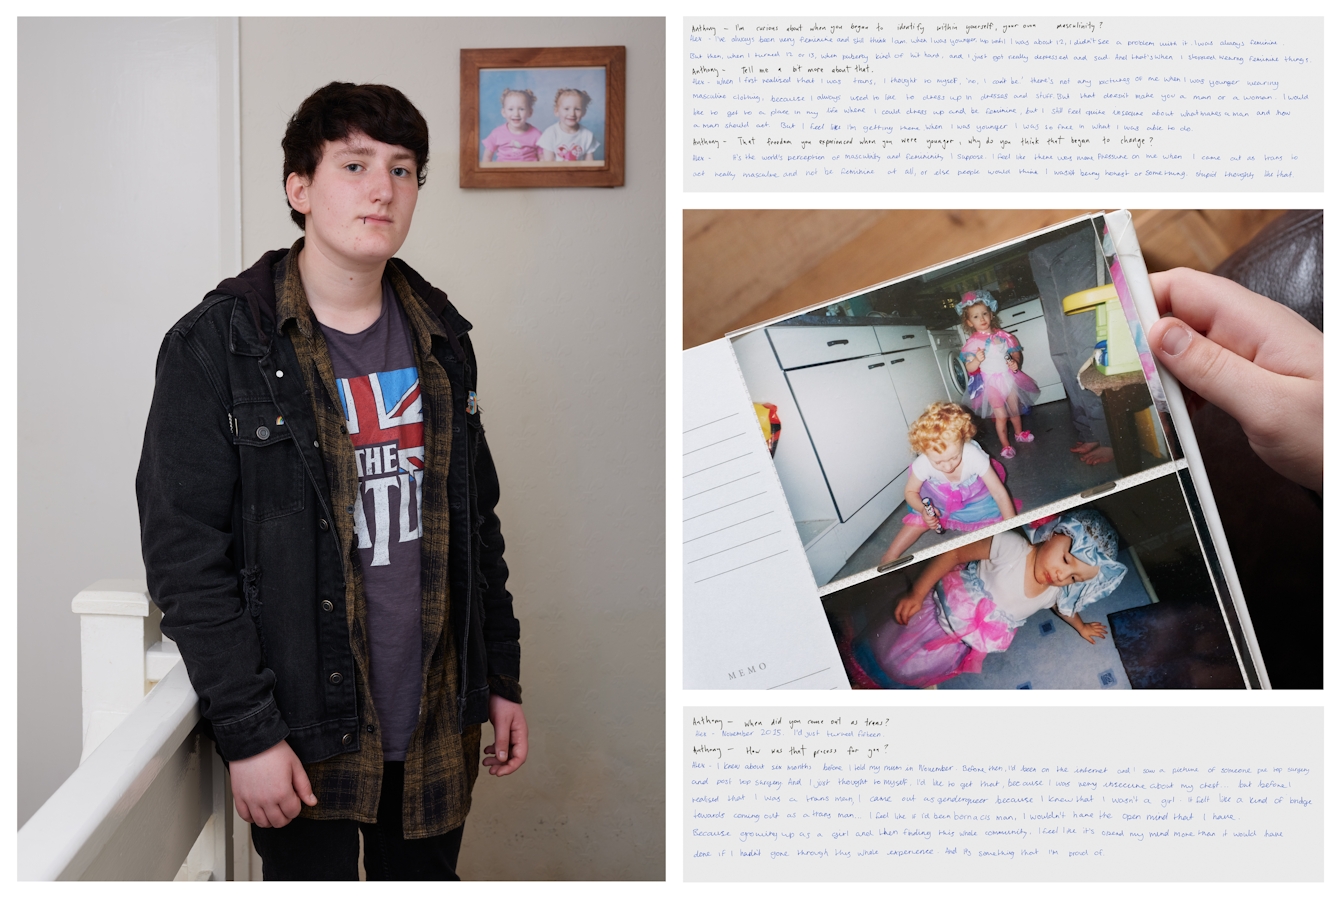 Photograph of an individual standing in an upstairs landing. They are looking straight to camera and behind them on the wall is a framed photograph showing 2 toddlers. To the right of this photograph is another photograph showing a hand holding a family photo of two toddlers in pink and blue outfits. Above and below this image are images of handwritten texts.